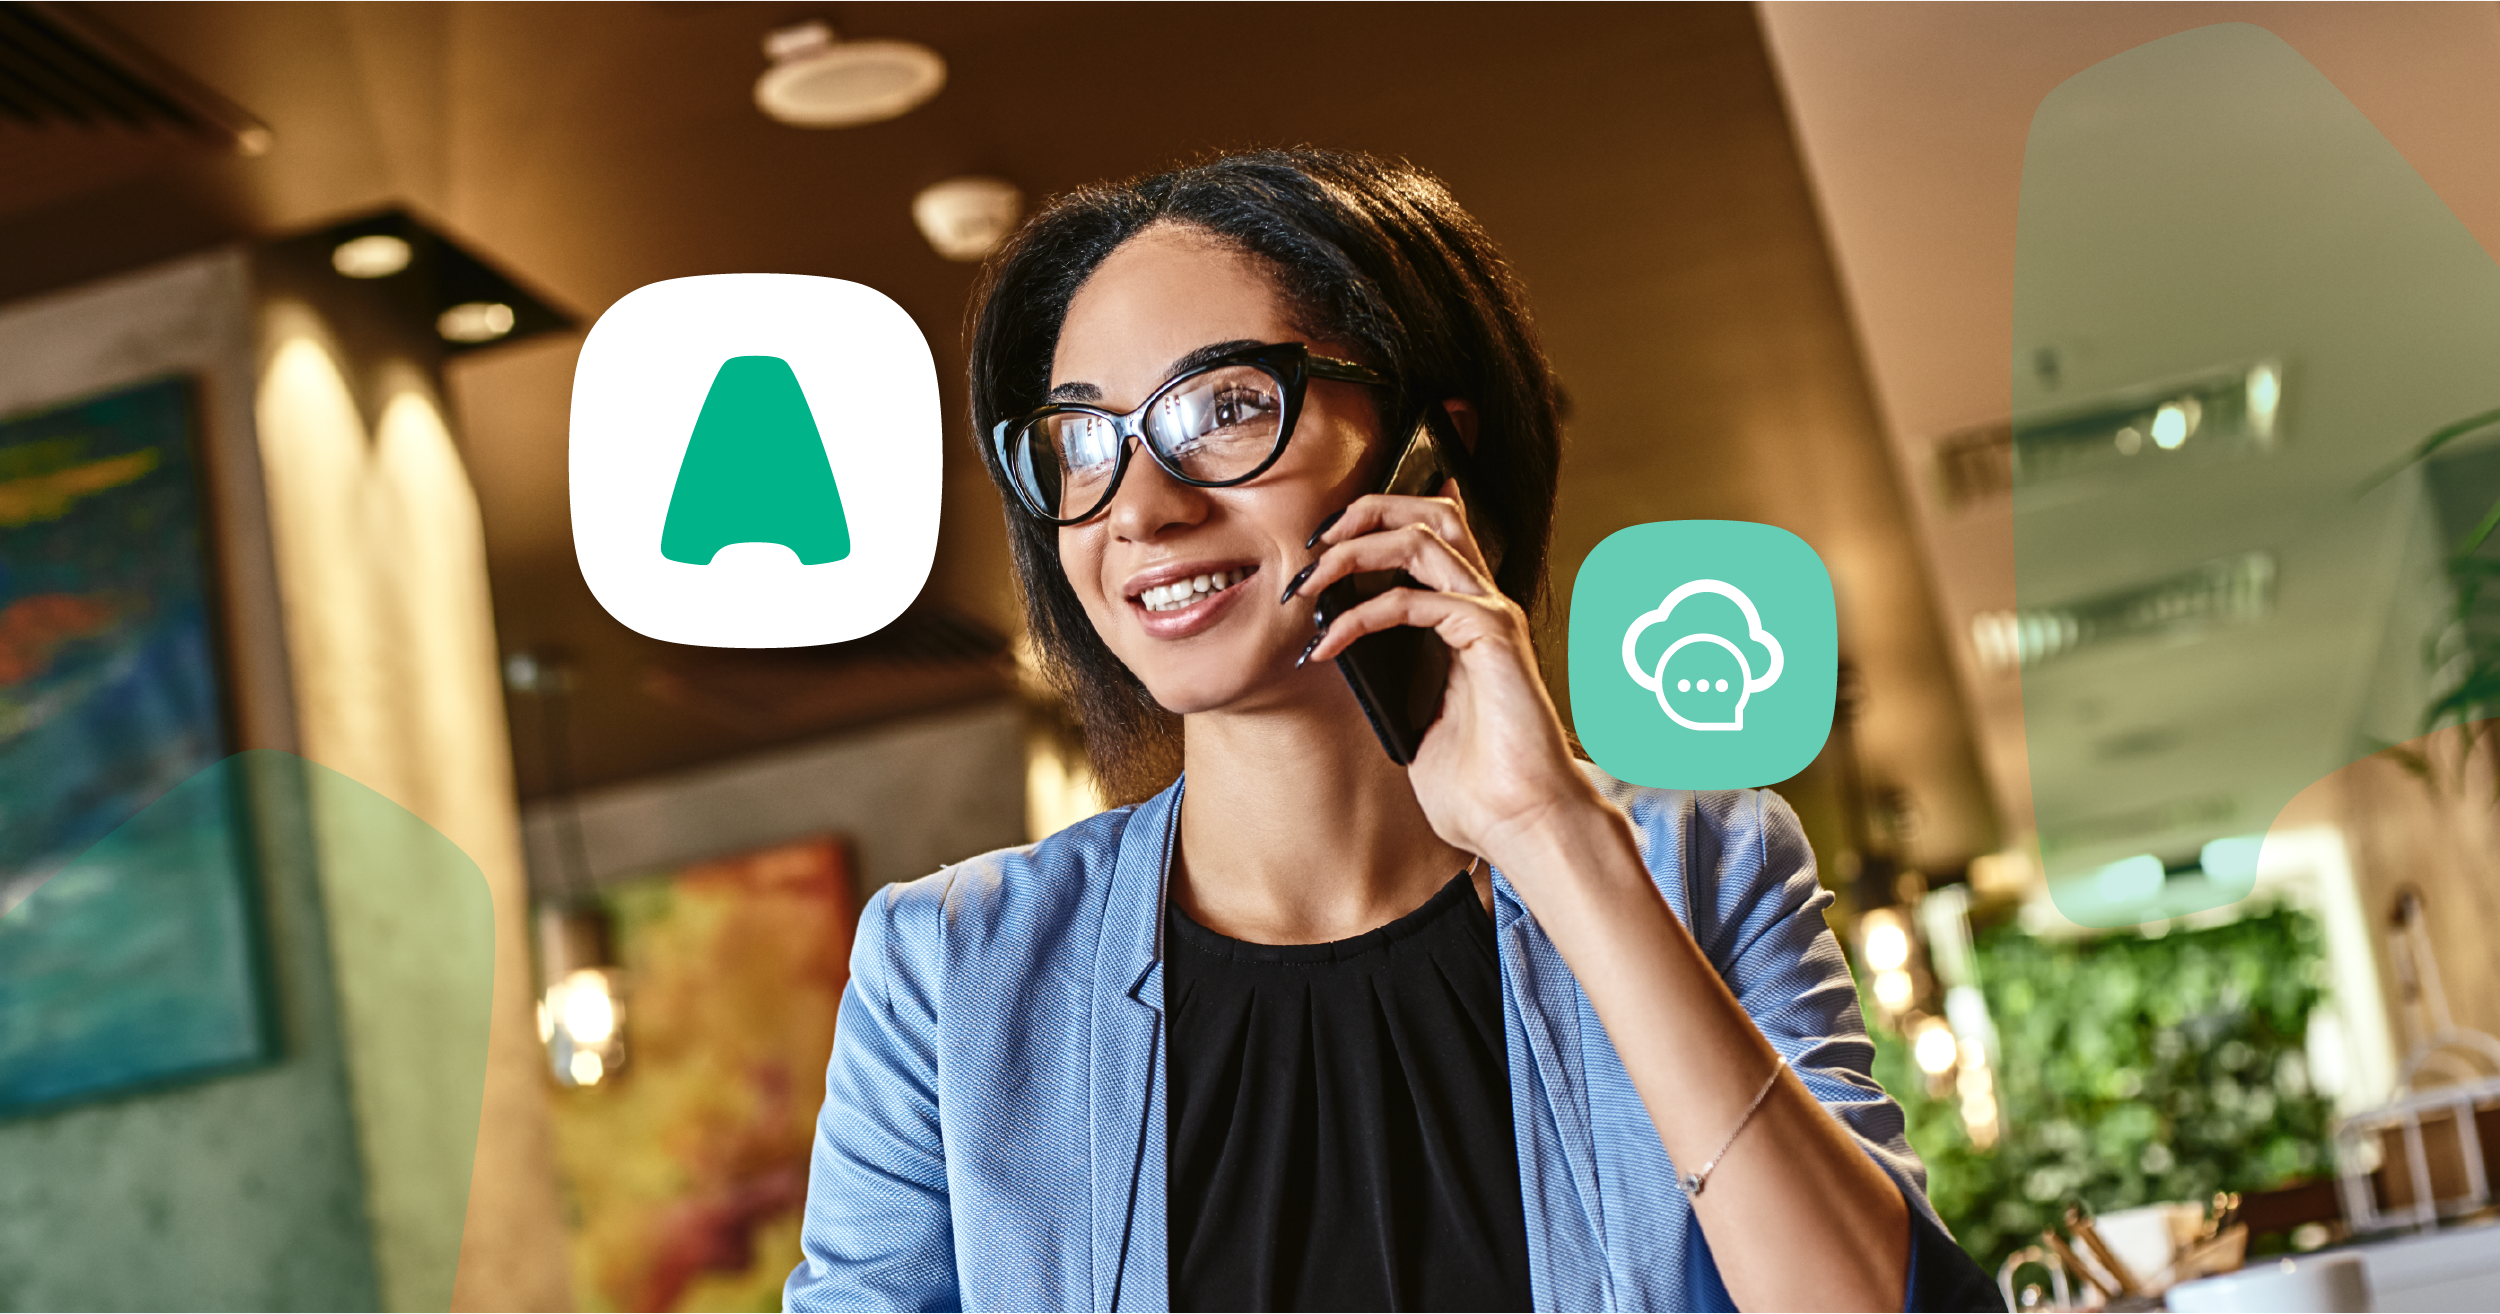 Want to integrate a reliable phone service to your CRM? We choose Aircall